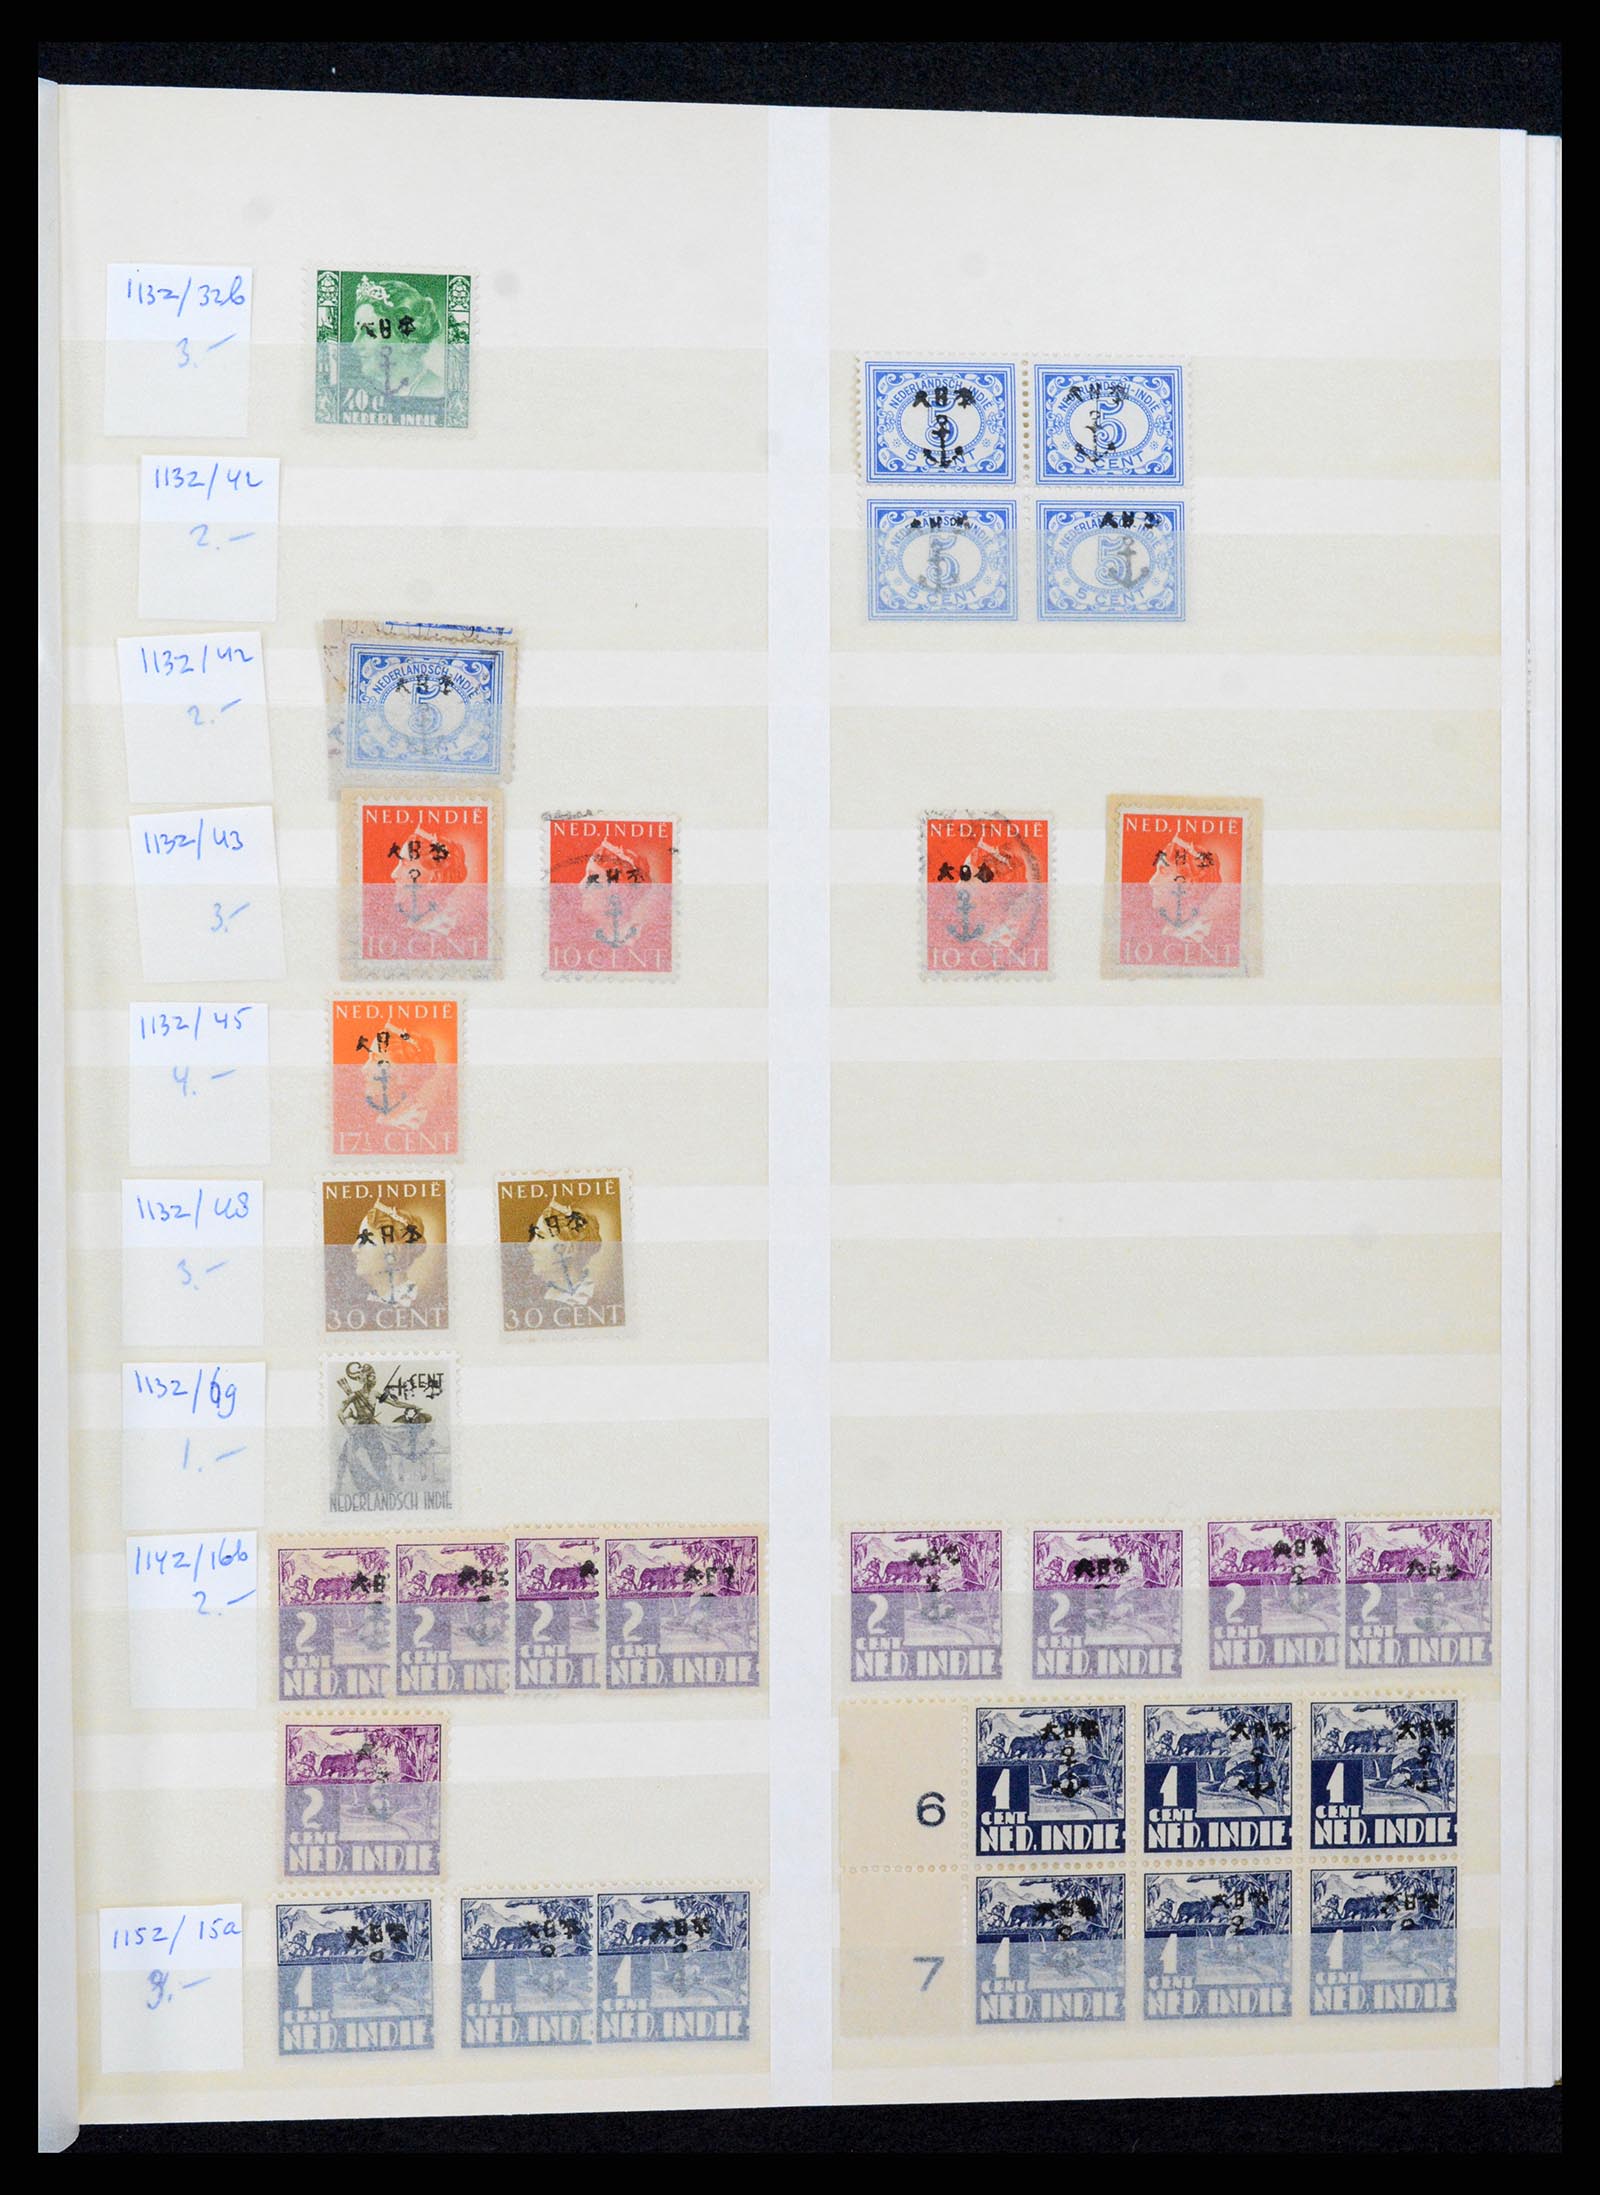 37429 021 - Stamp collection 37429 Japanese occupation Dutch East Indies 1942-1945.